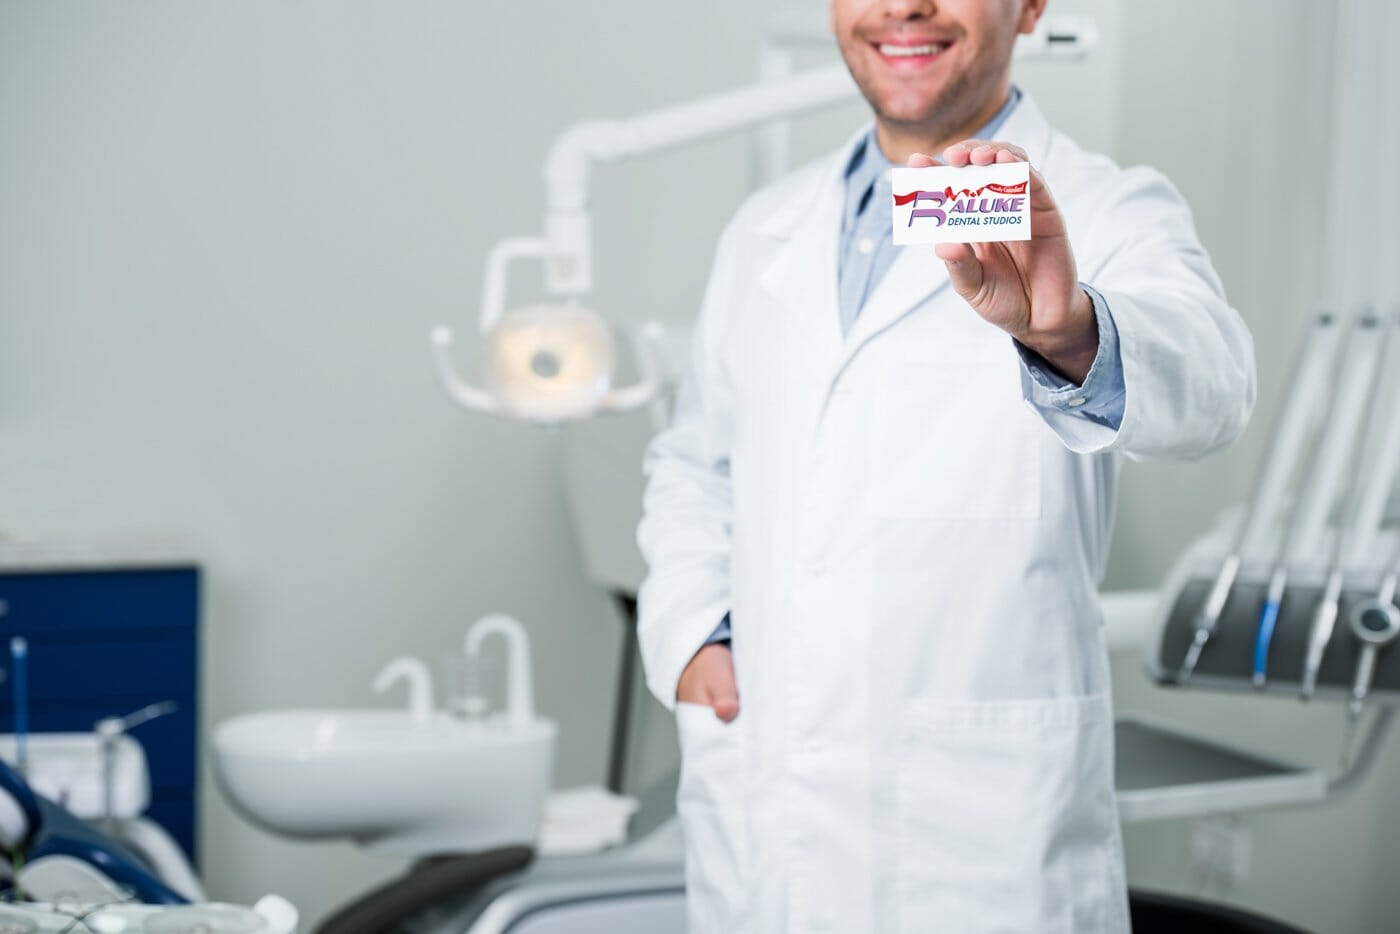 How Do Dental Labs Collaborate With Dentists And Dental Specialists In Treatment Planning And Execution? – Baluke Dental Studios